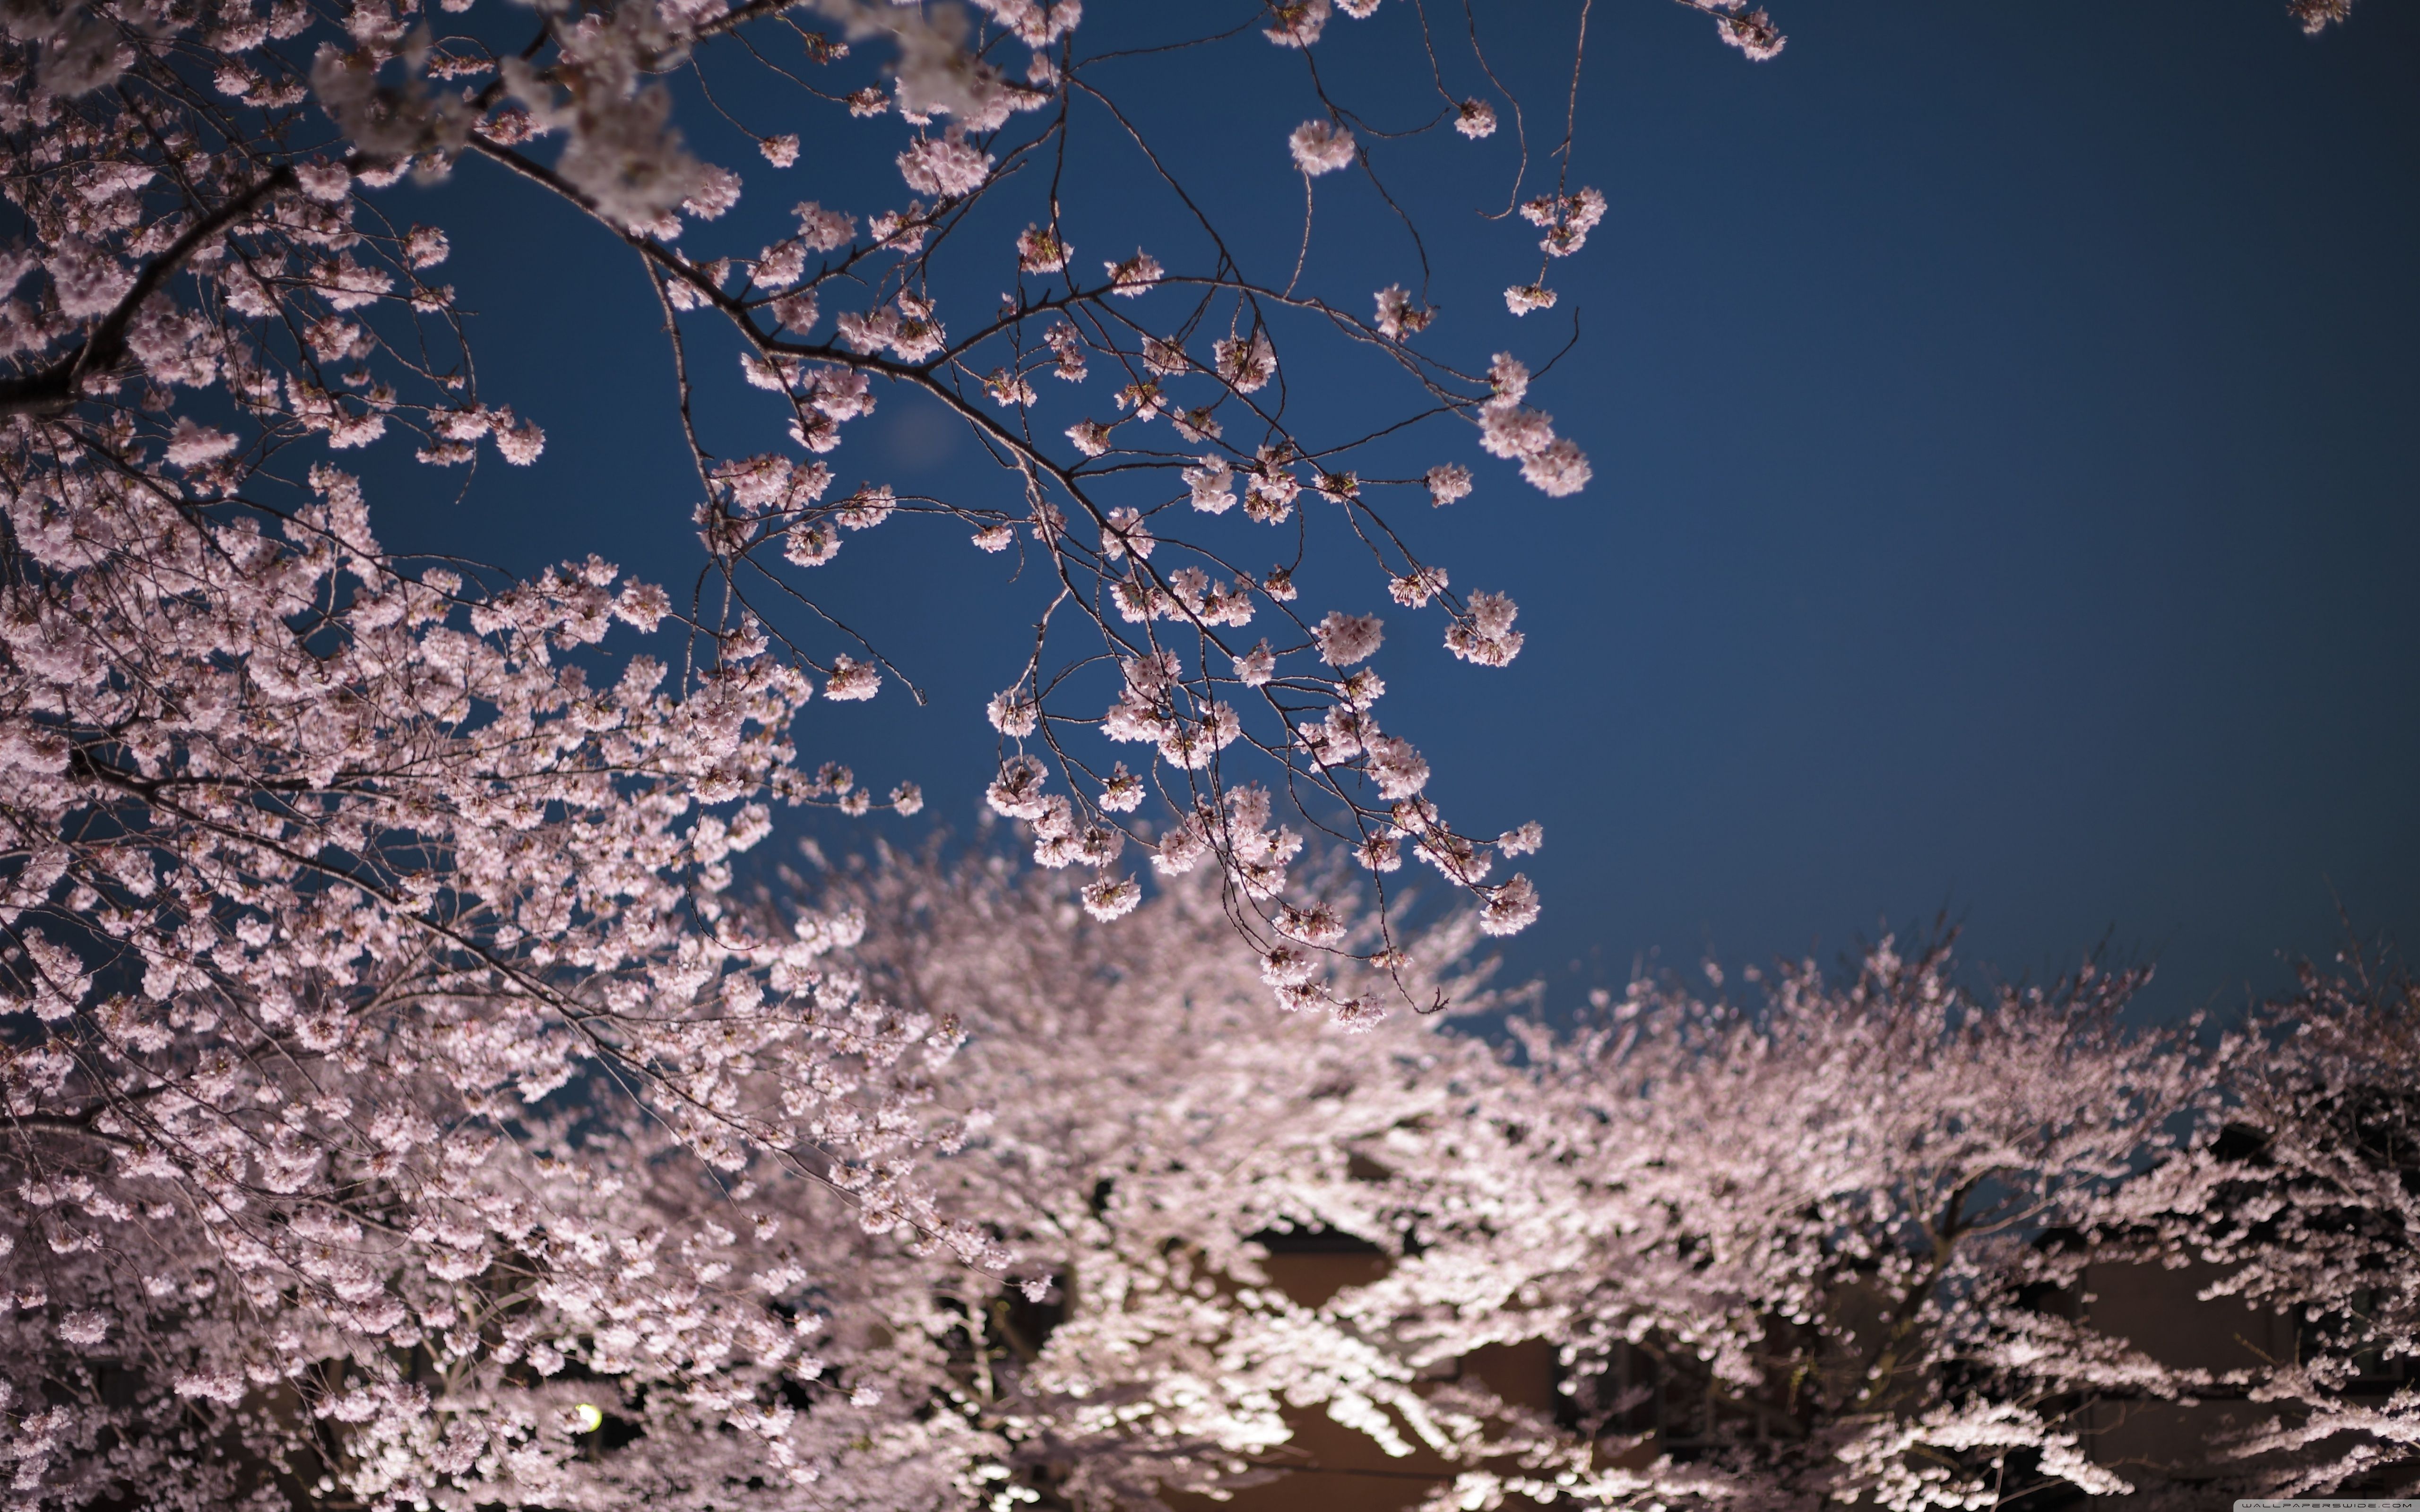 Cherry Blossoms at Night Wallpaper